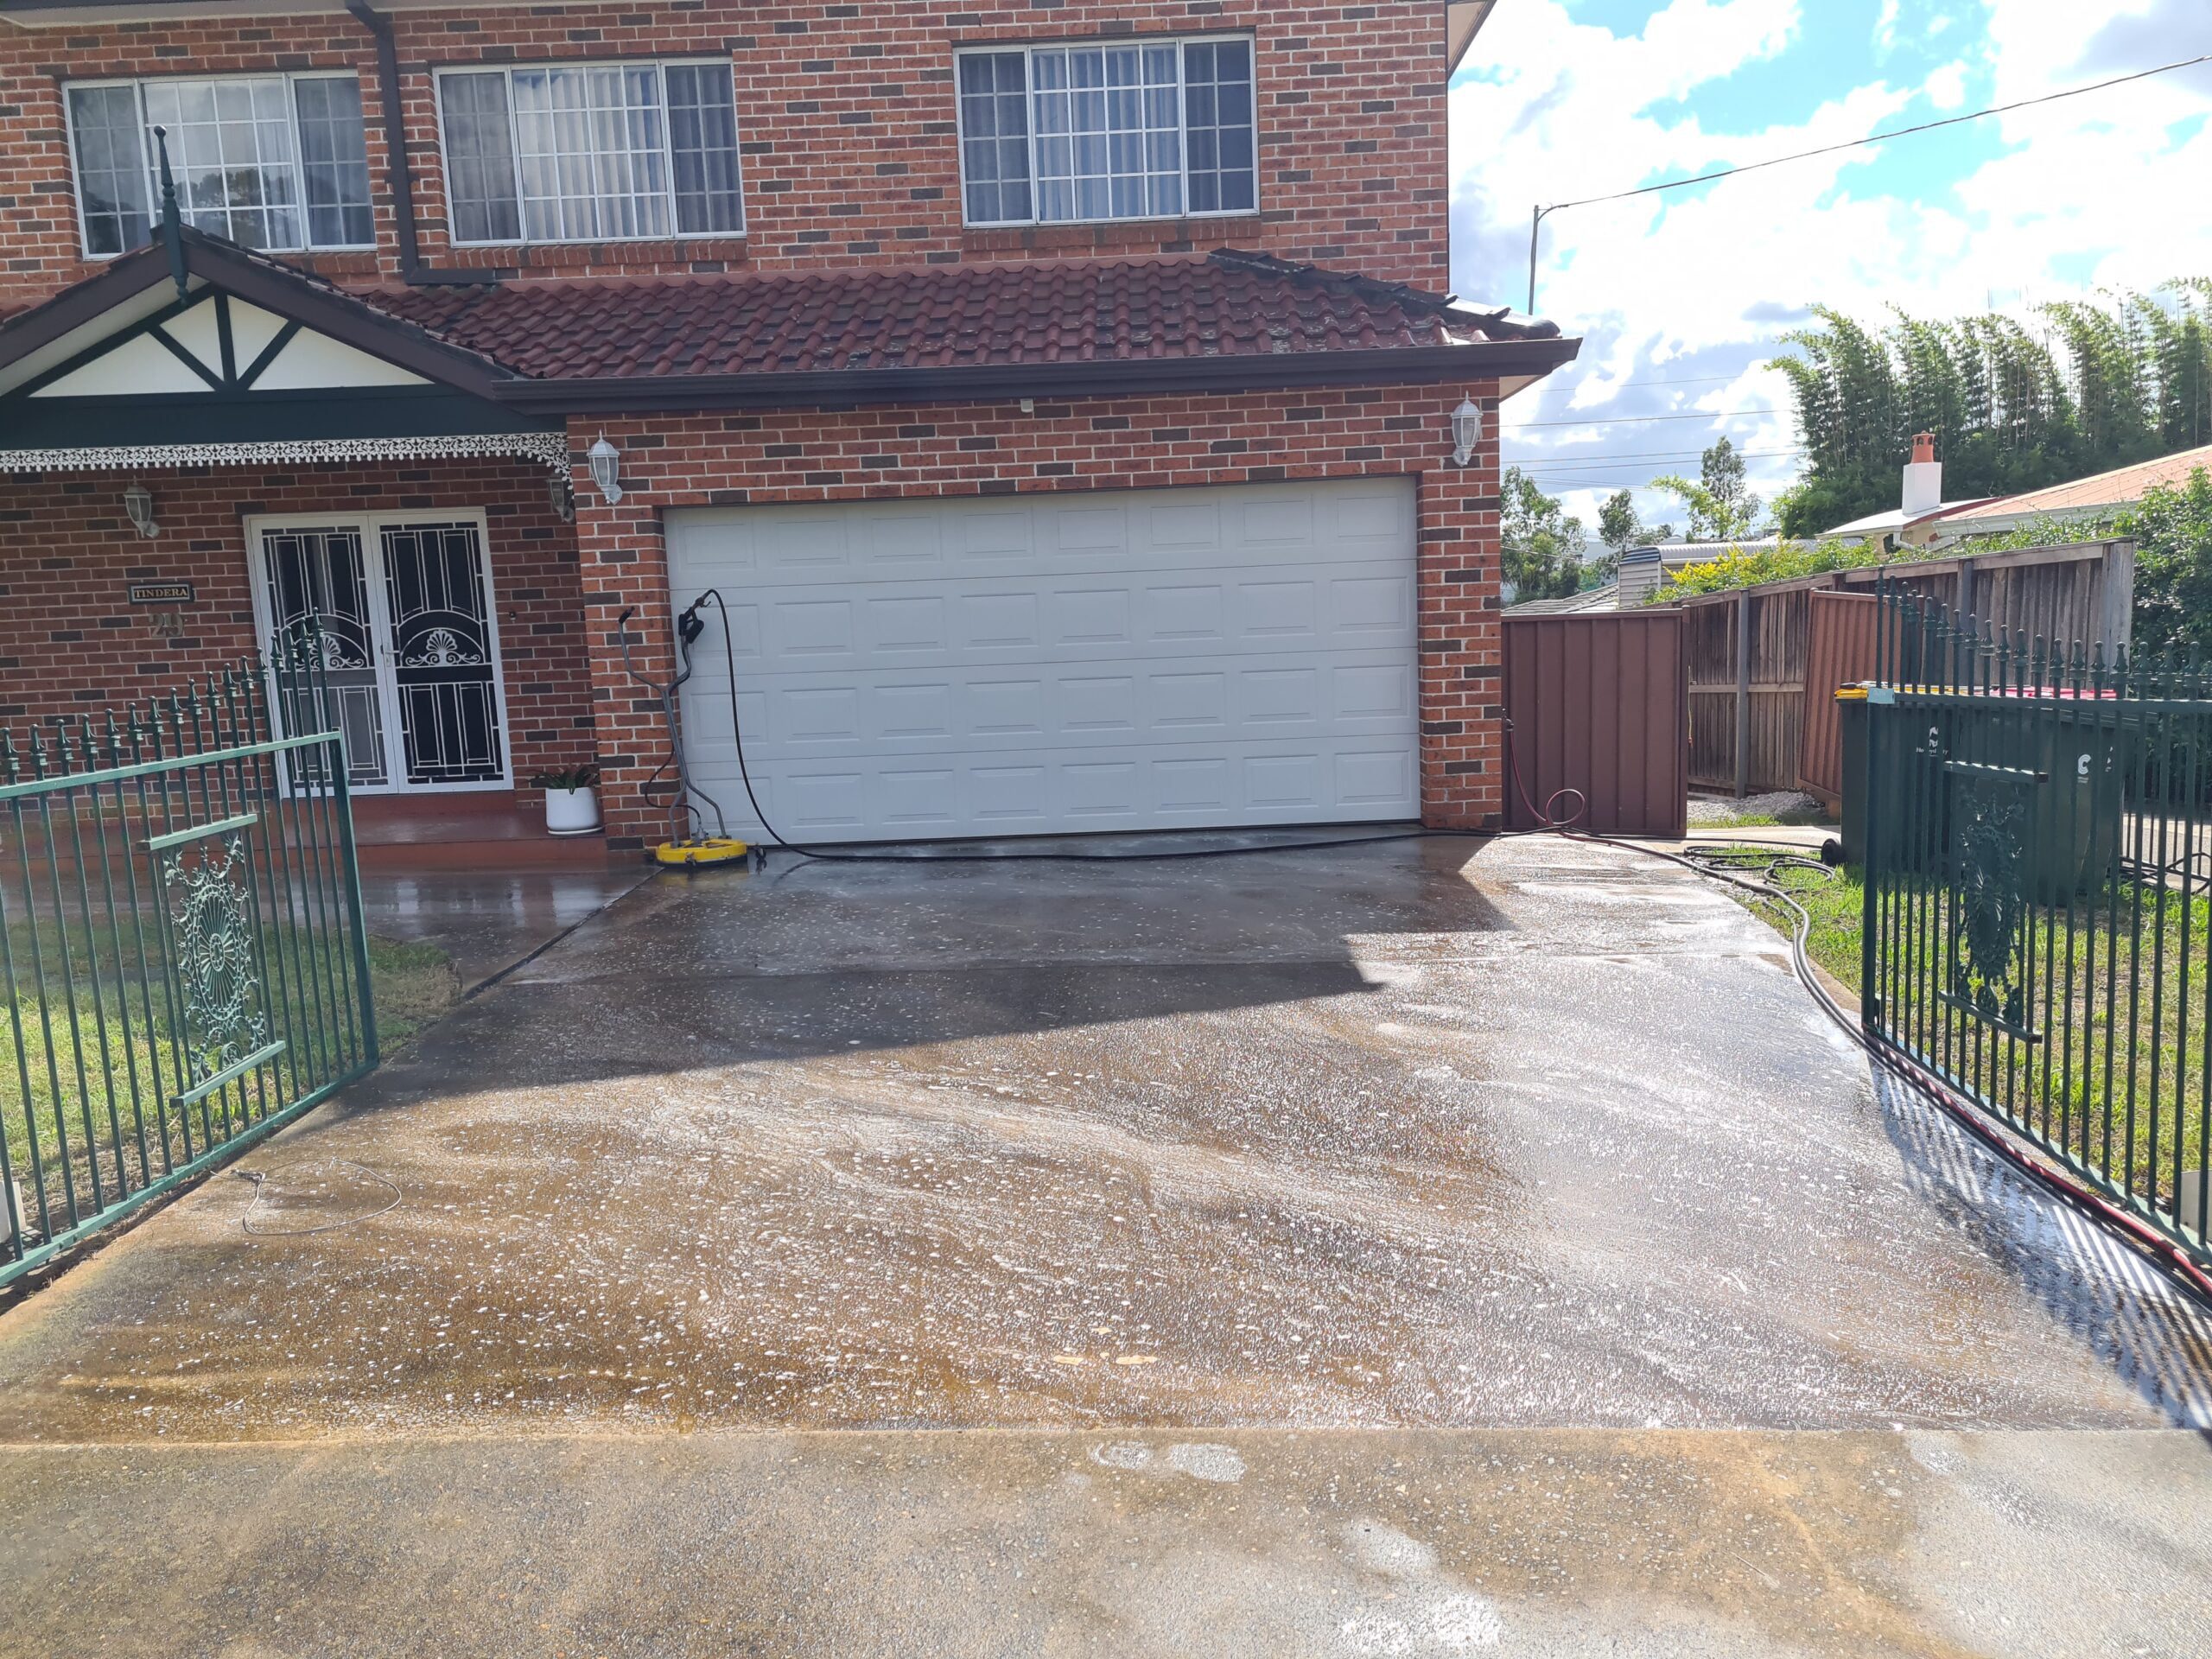 Residential Pressure Cleaning and Washing Services in Sydney